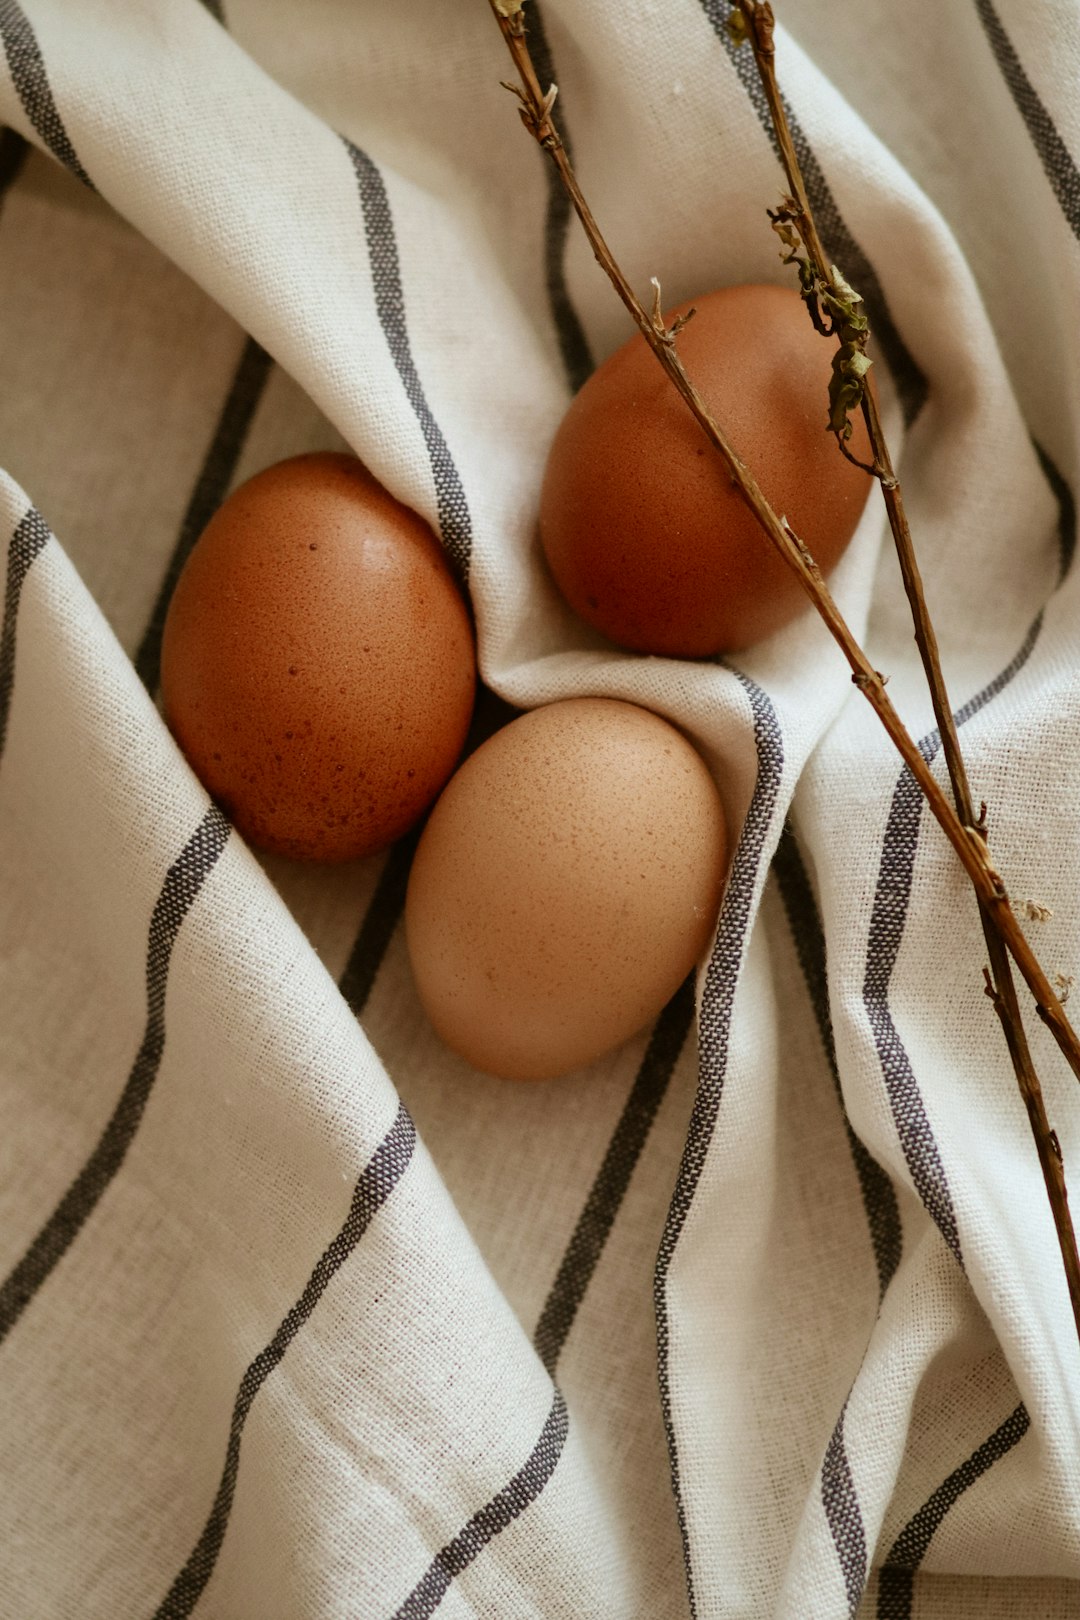 brown egg on white and black textile